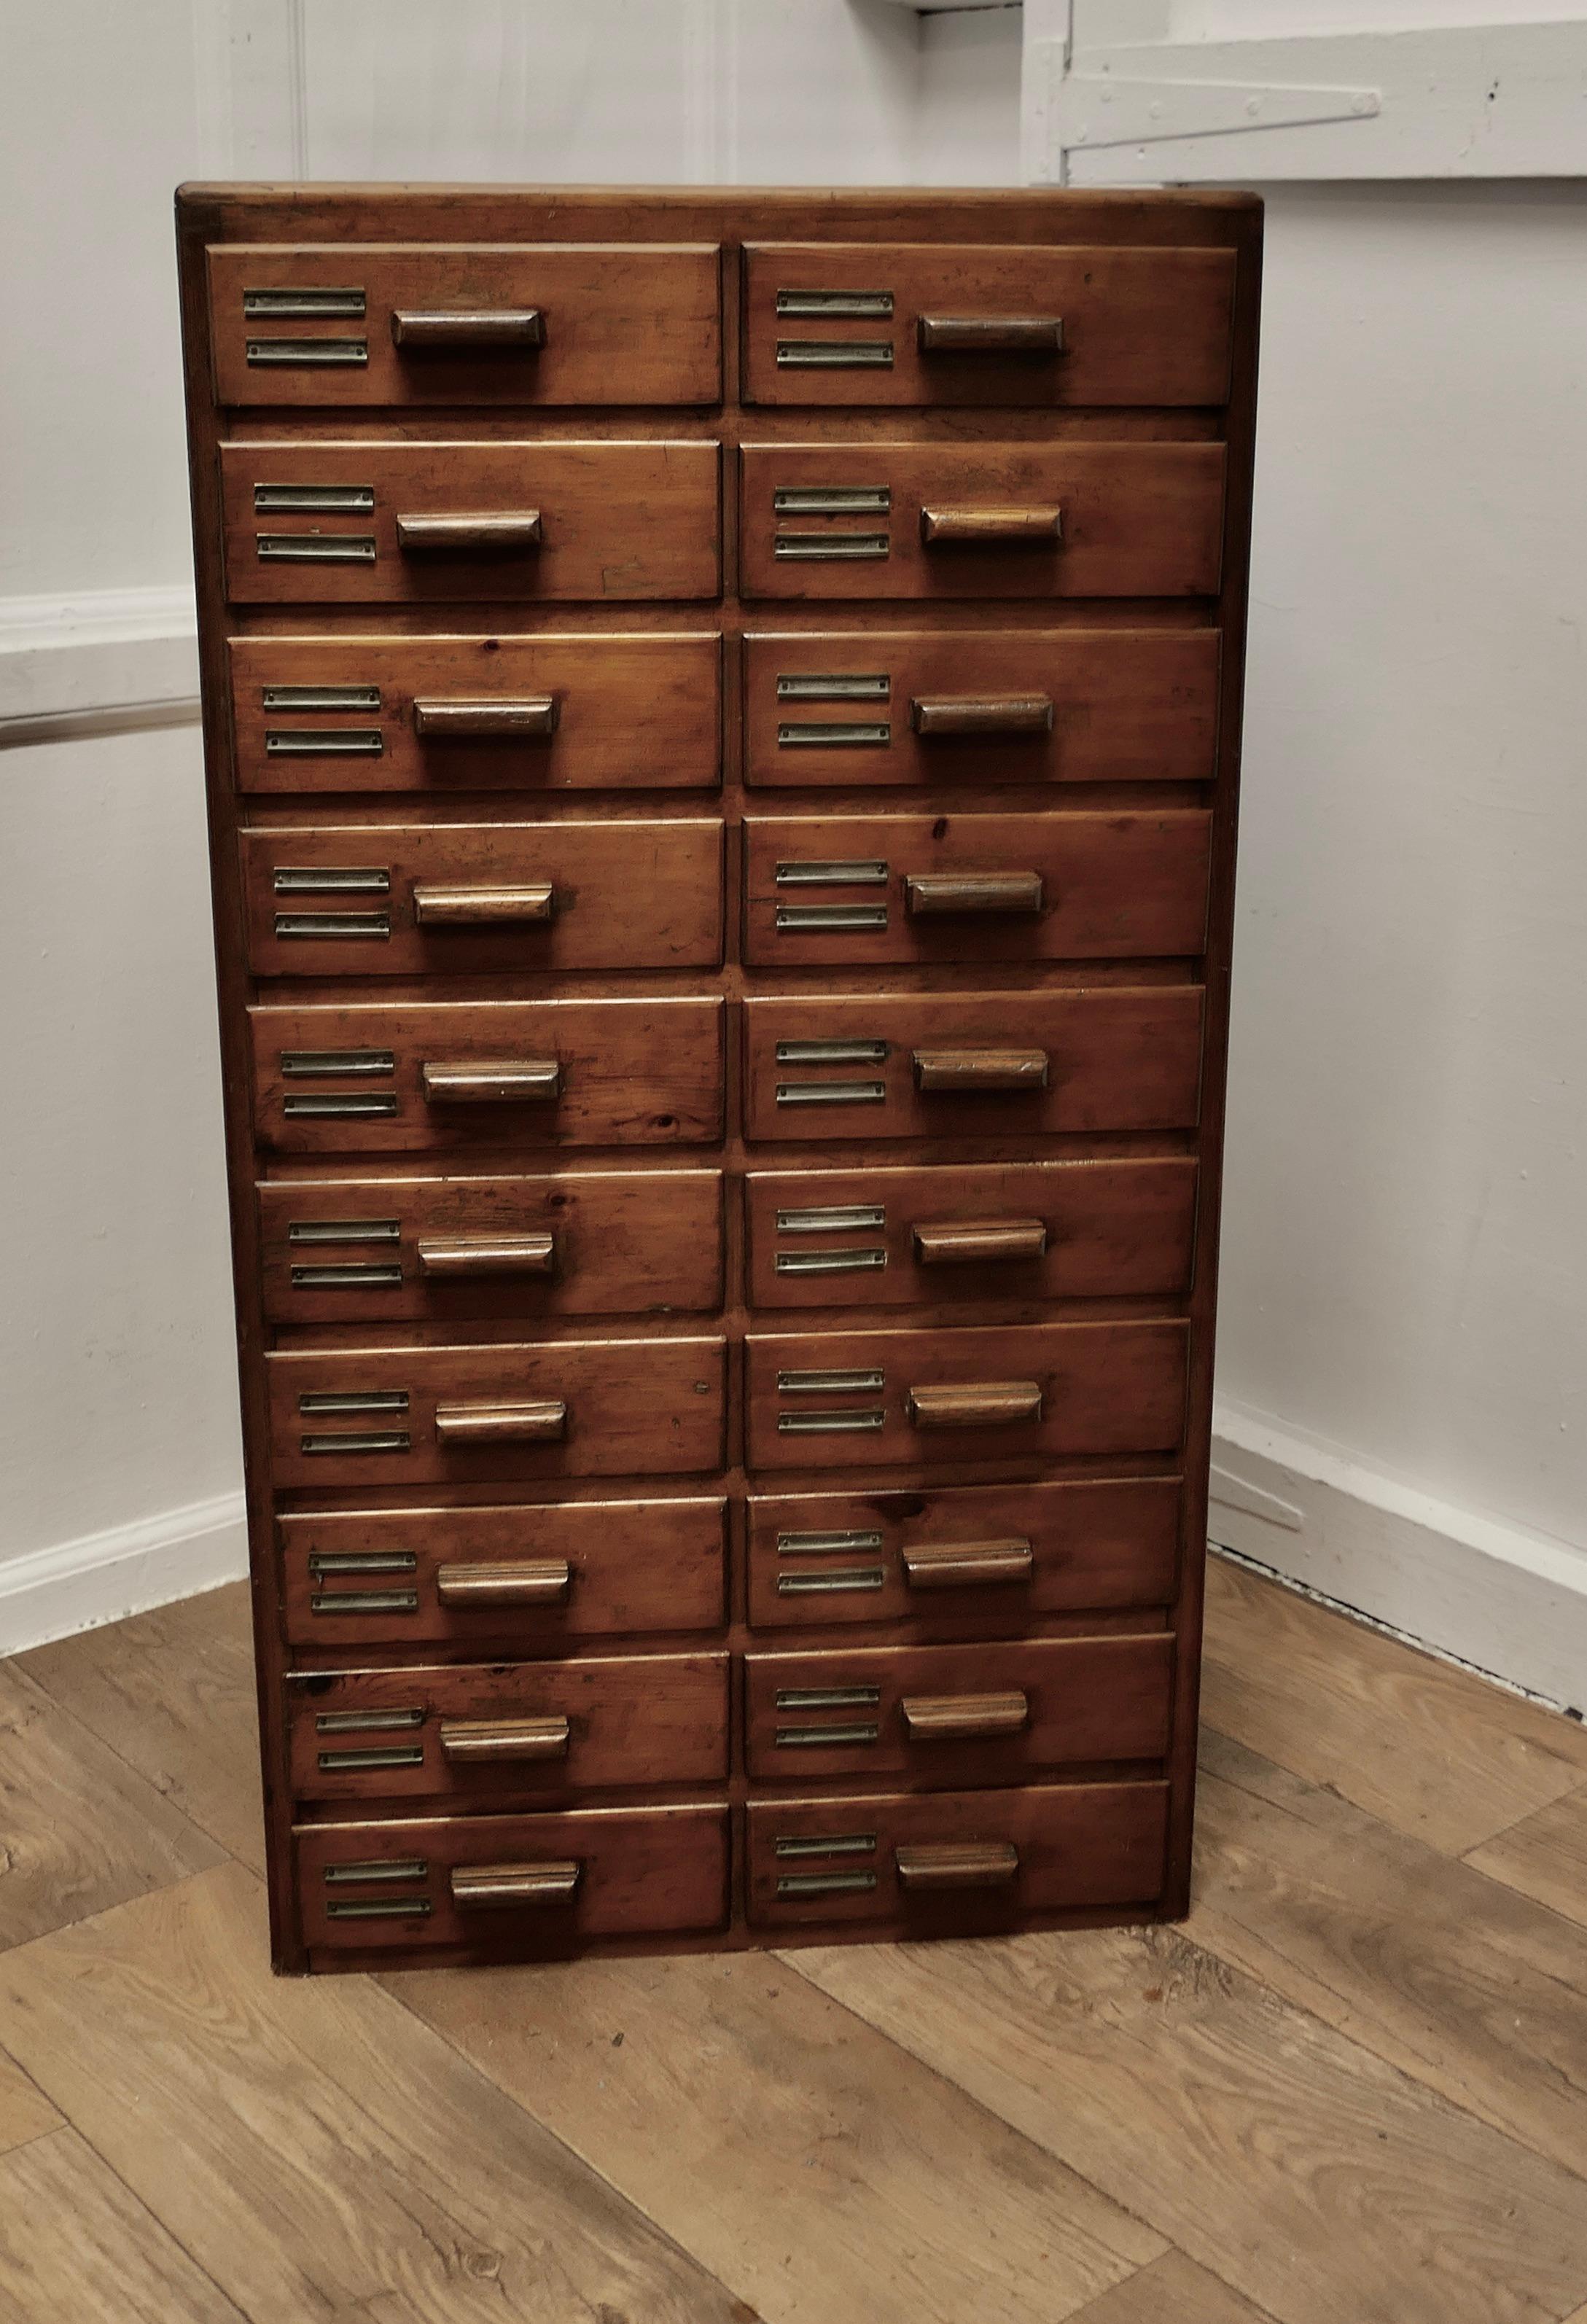 20 Drawer Art Deco A4 Filing Cabinet

This is a good sturdy cabinet, the drawers are 3” deep and a good fit fro A4 documents, the fronts are in stained pine with a matching handle and each one has a metal label holder
The cabinet is in sound